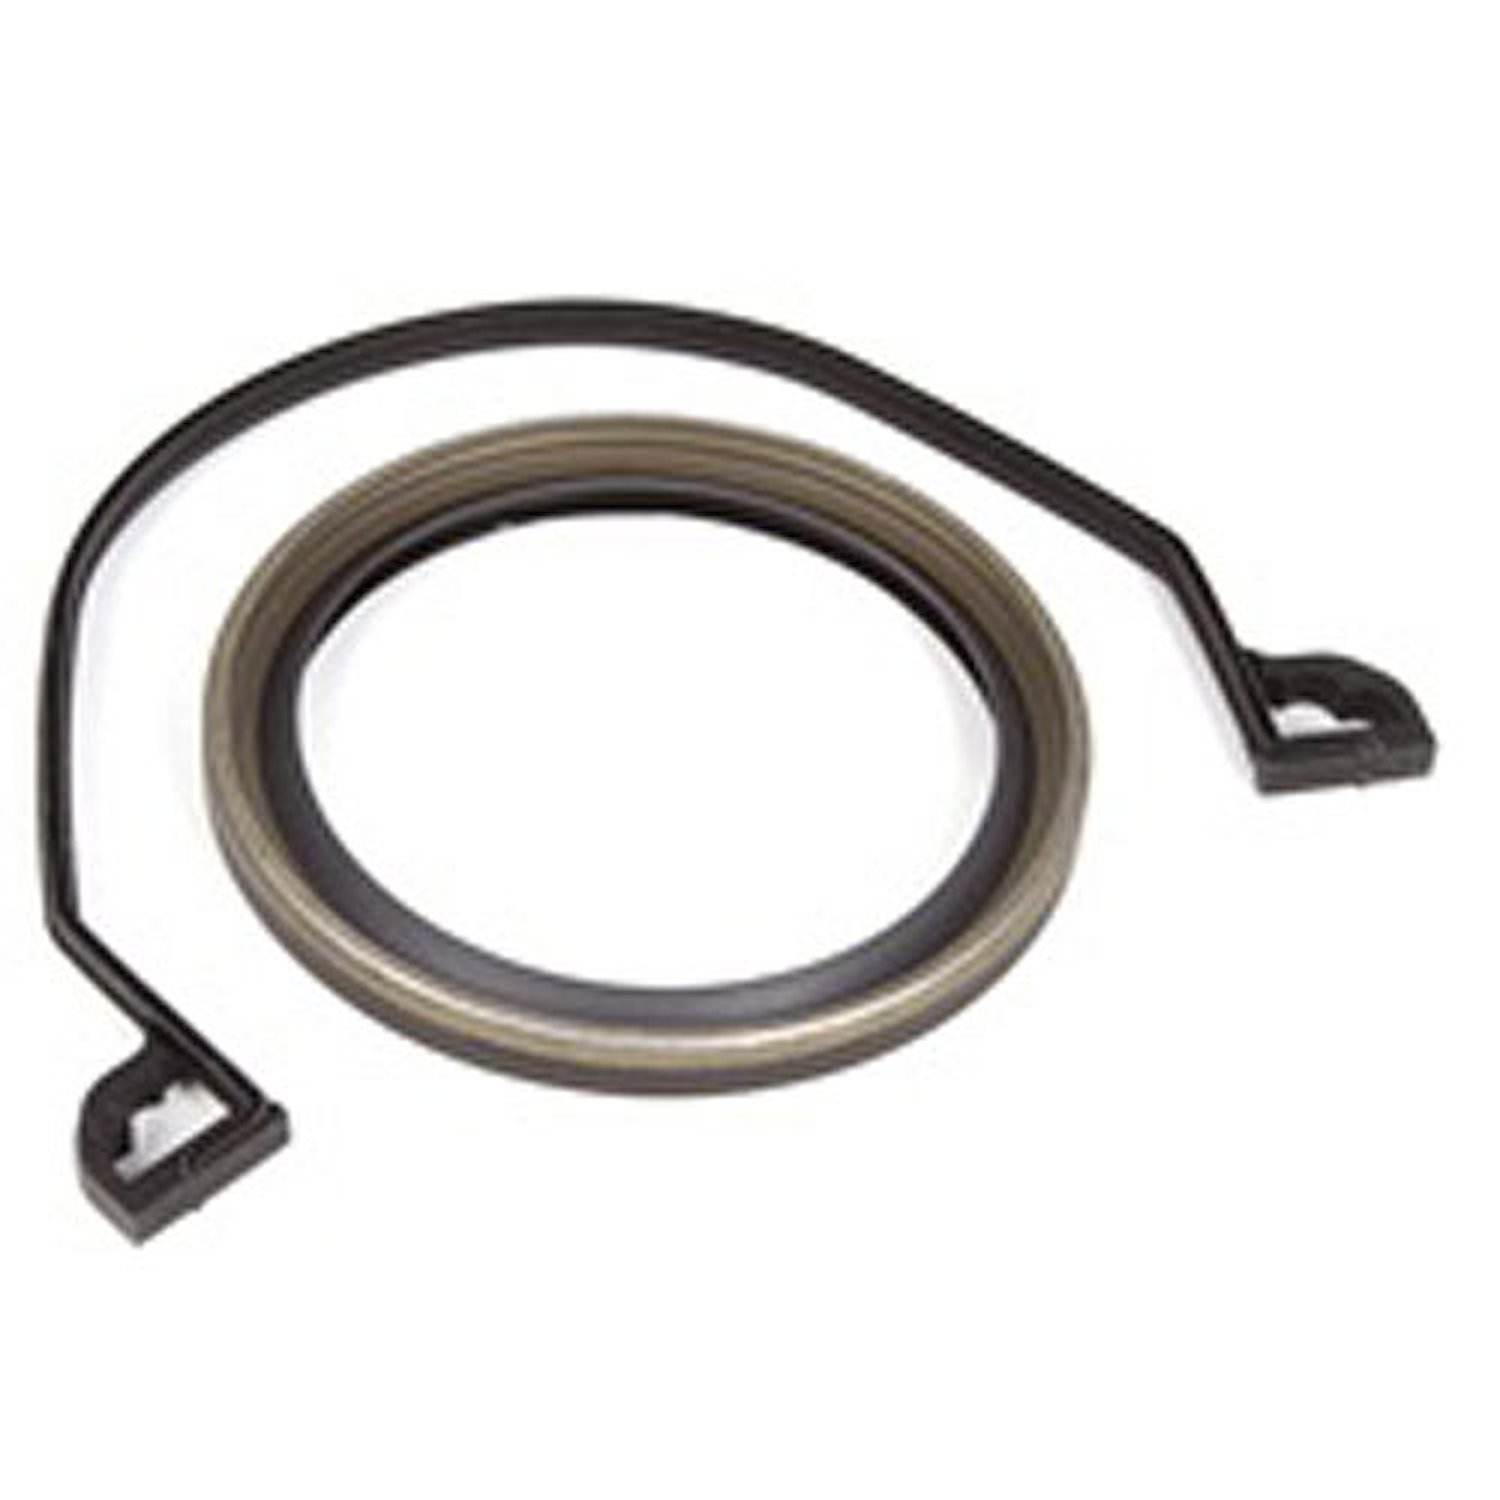 This rear main seal from Omix-ADA fits the